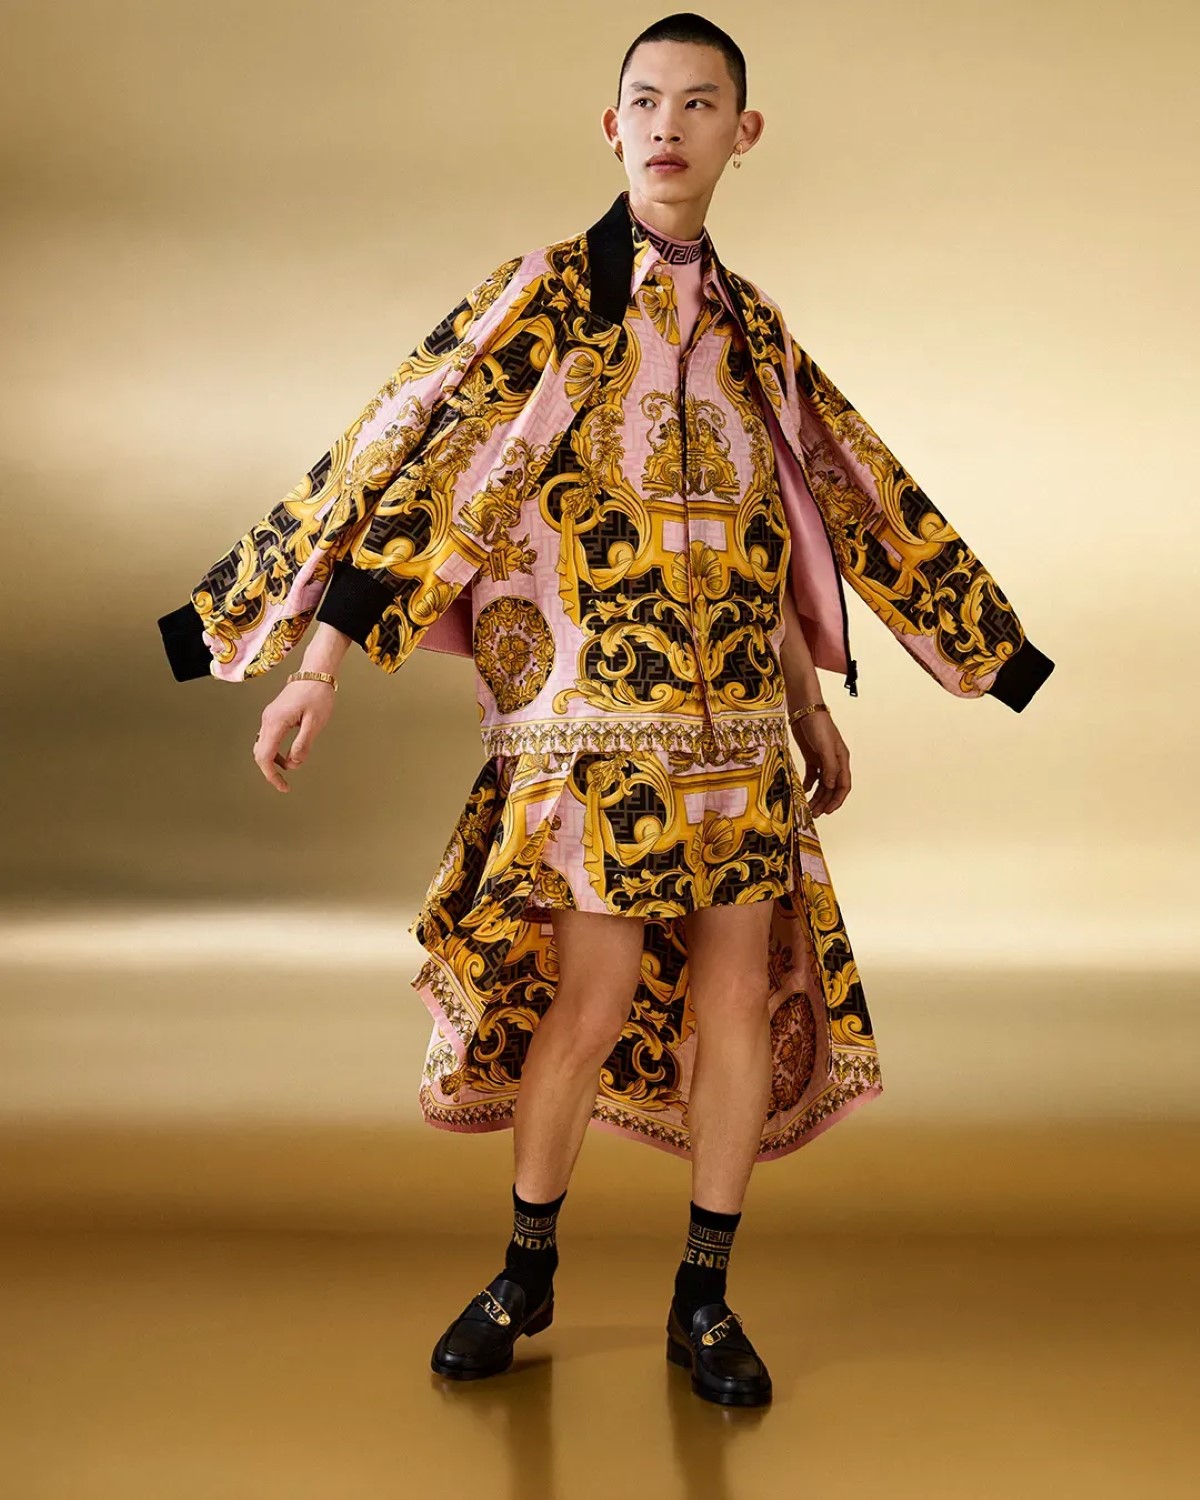 Fendi and Versace have officially released ‘’Fendace’’ collection